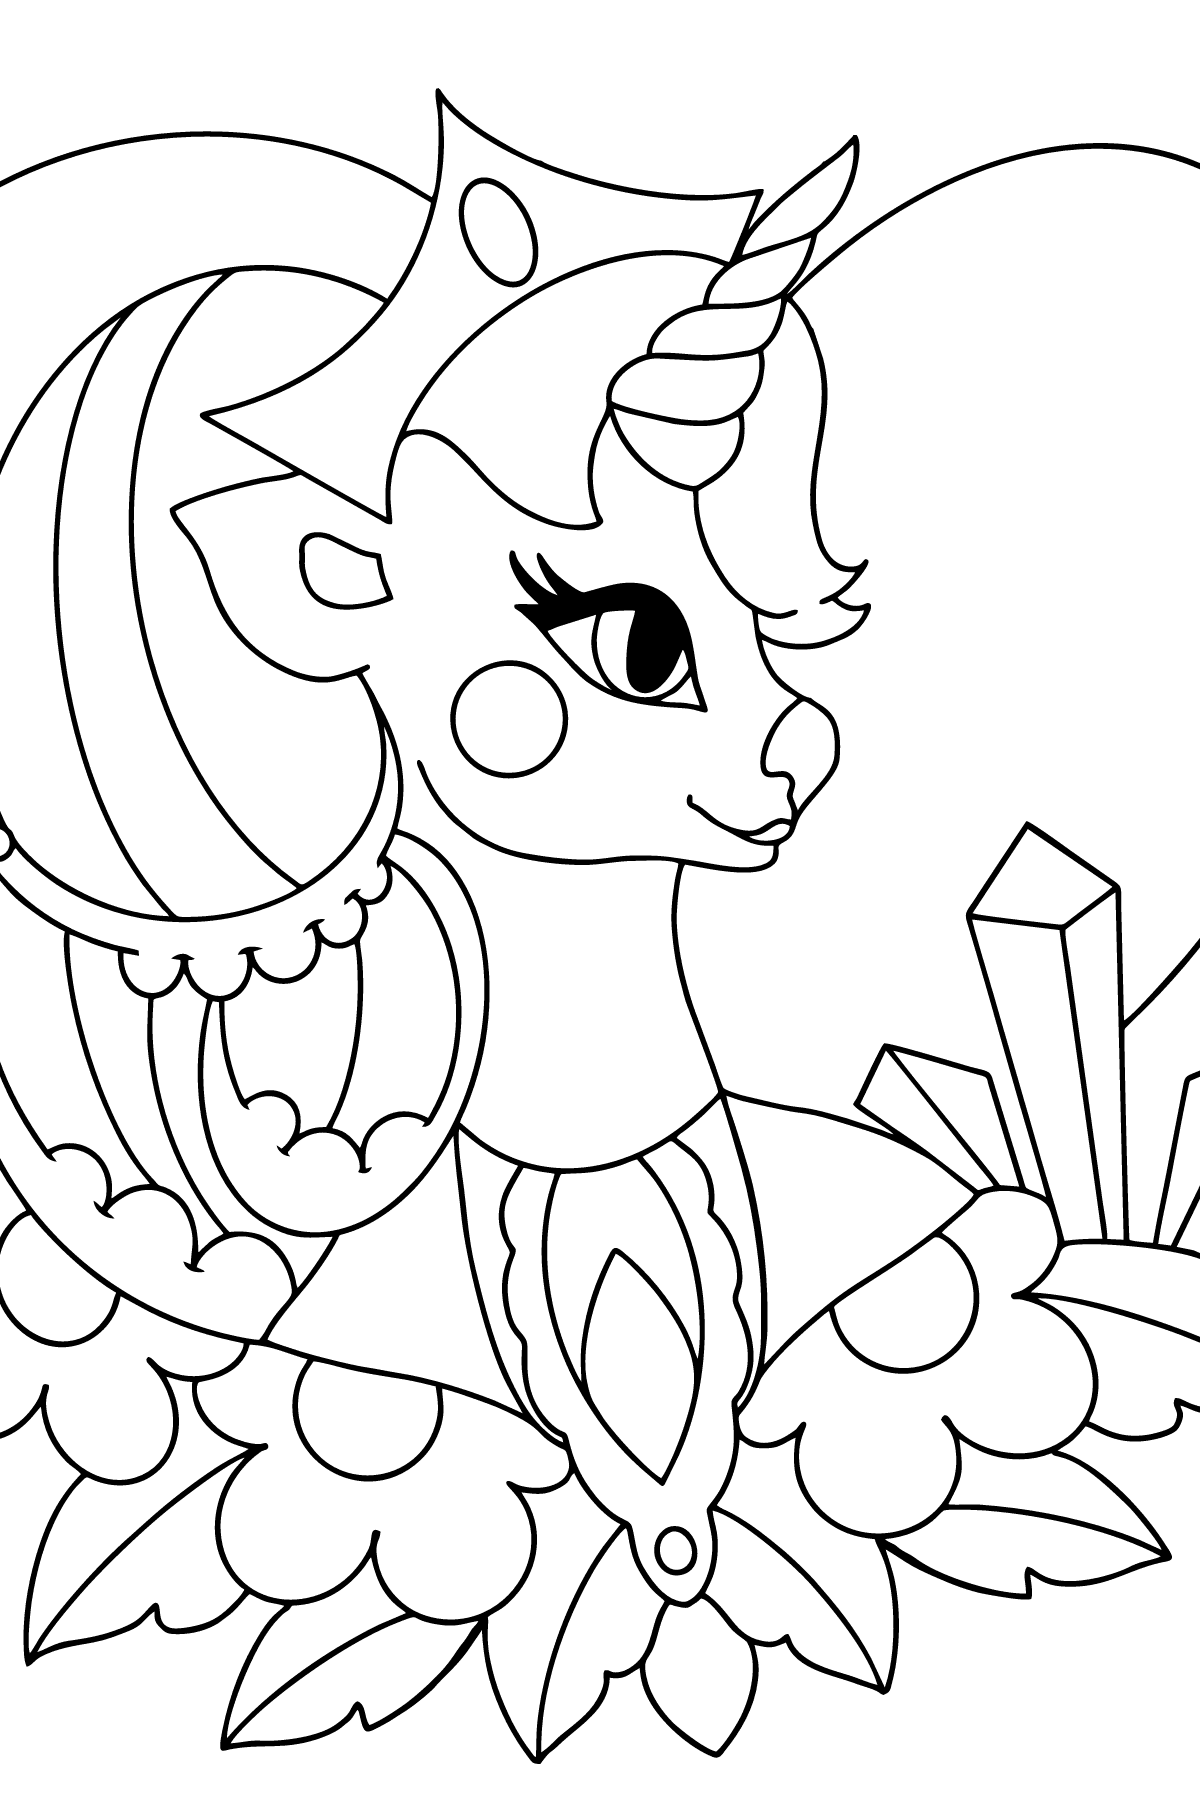 Beautiful Unicorn coloring page - Coloring Pages for Kids